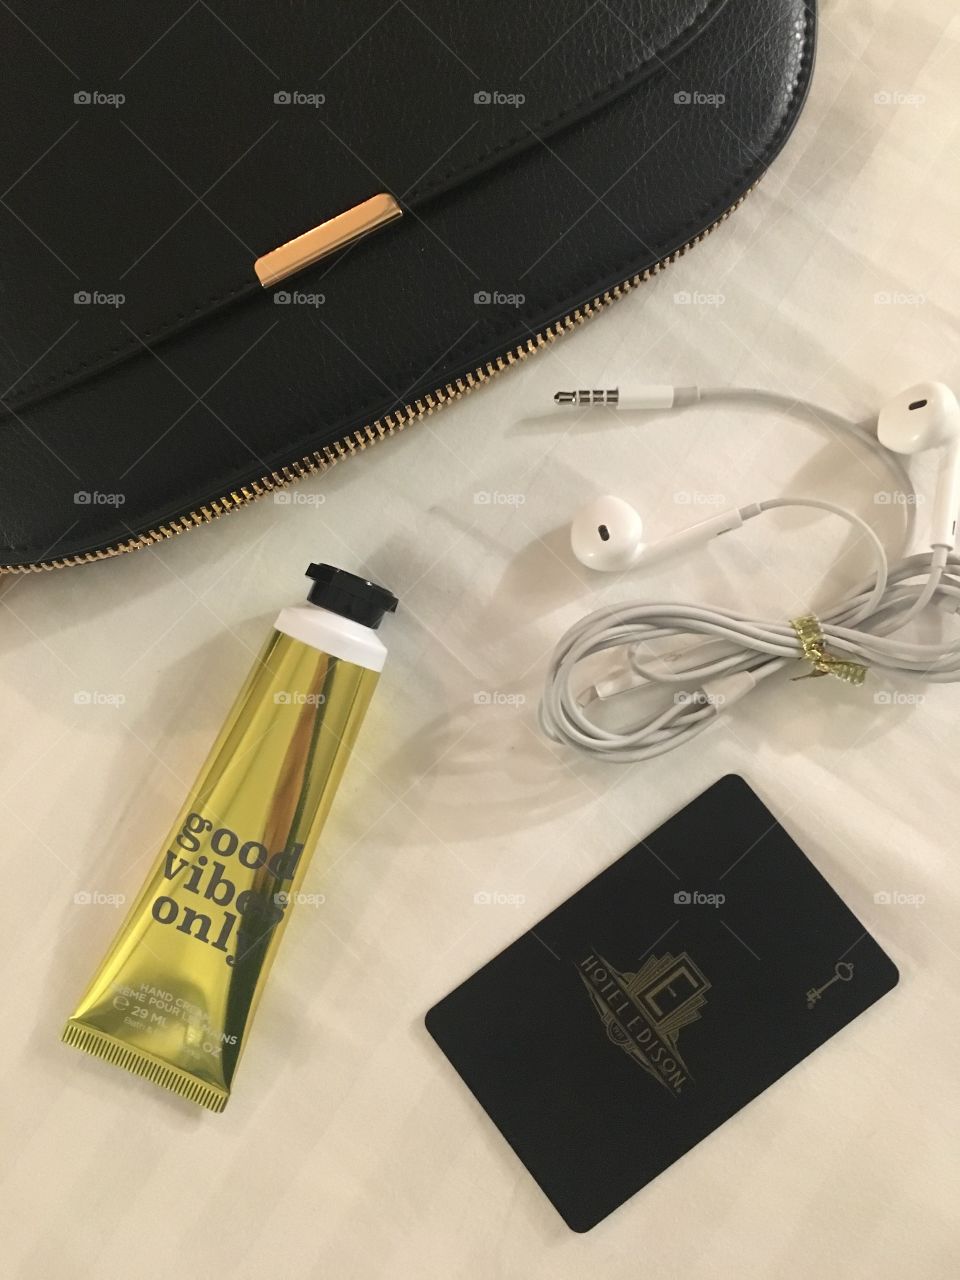 Travel essentials for your crossbody bag while urban exploring. Headphones, room key, and good vibes are inside. 